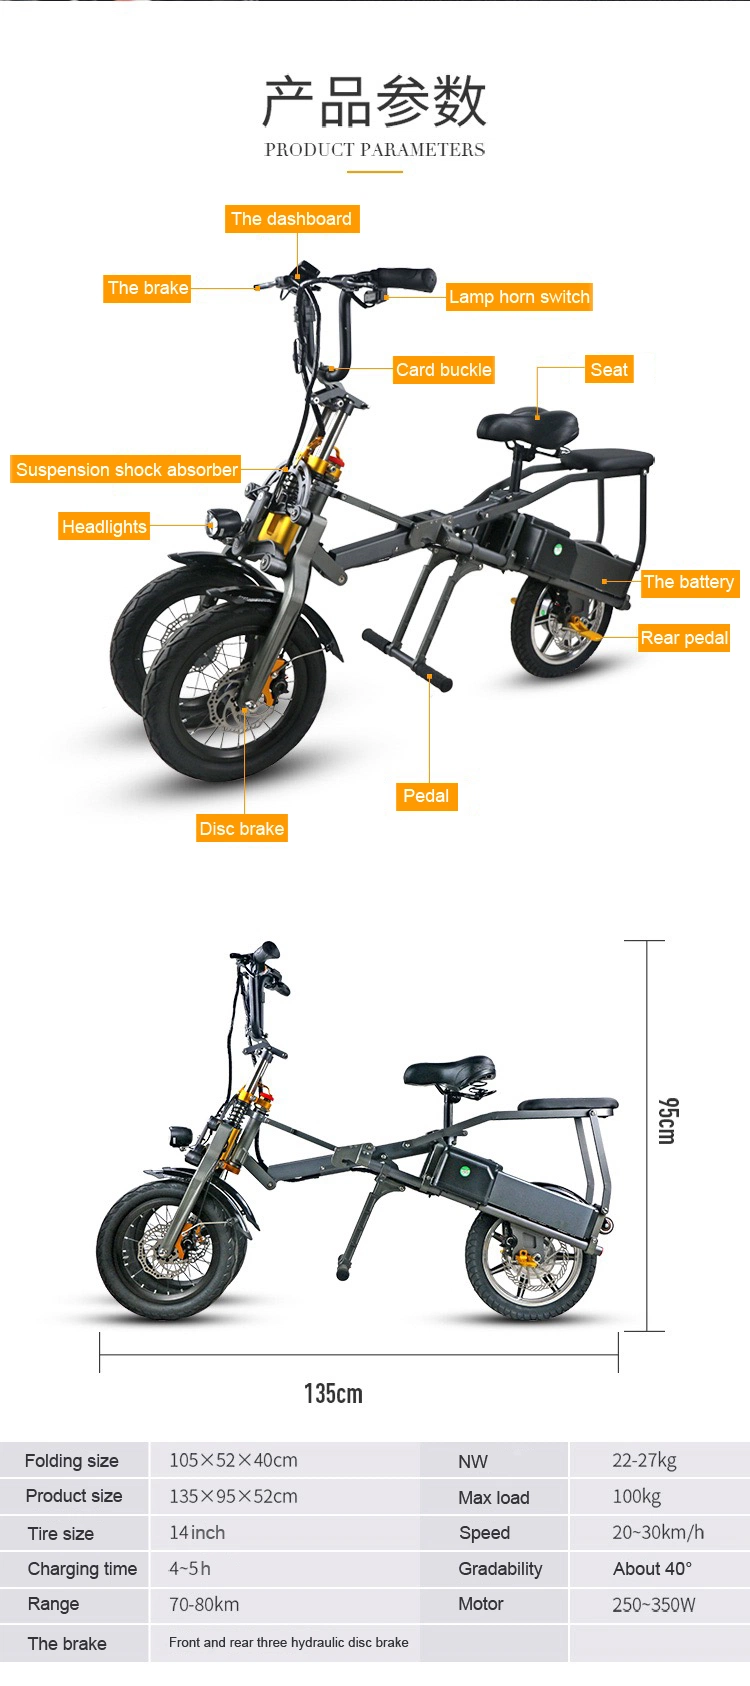 Dokma Dual Battery Bws 48V 15.6ah 500W Ebike Foldable Adult Double Seat Mobility 3 Wheels Electric Scooter